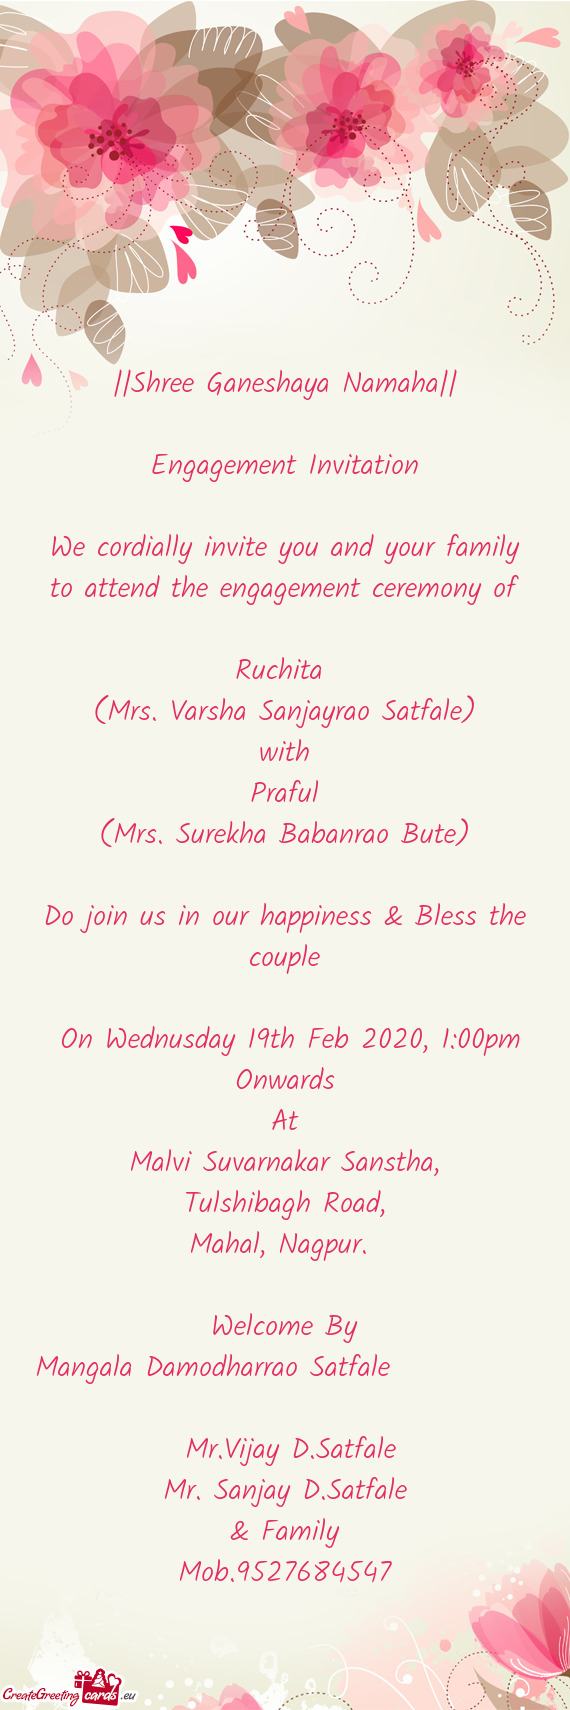 Do join us in our happiness & Bless the couple